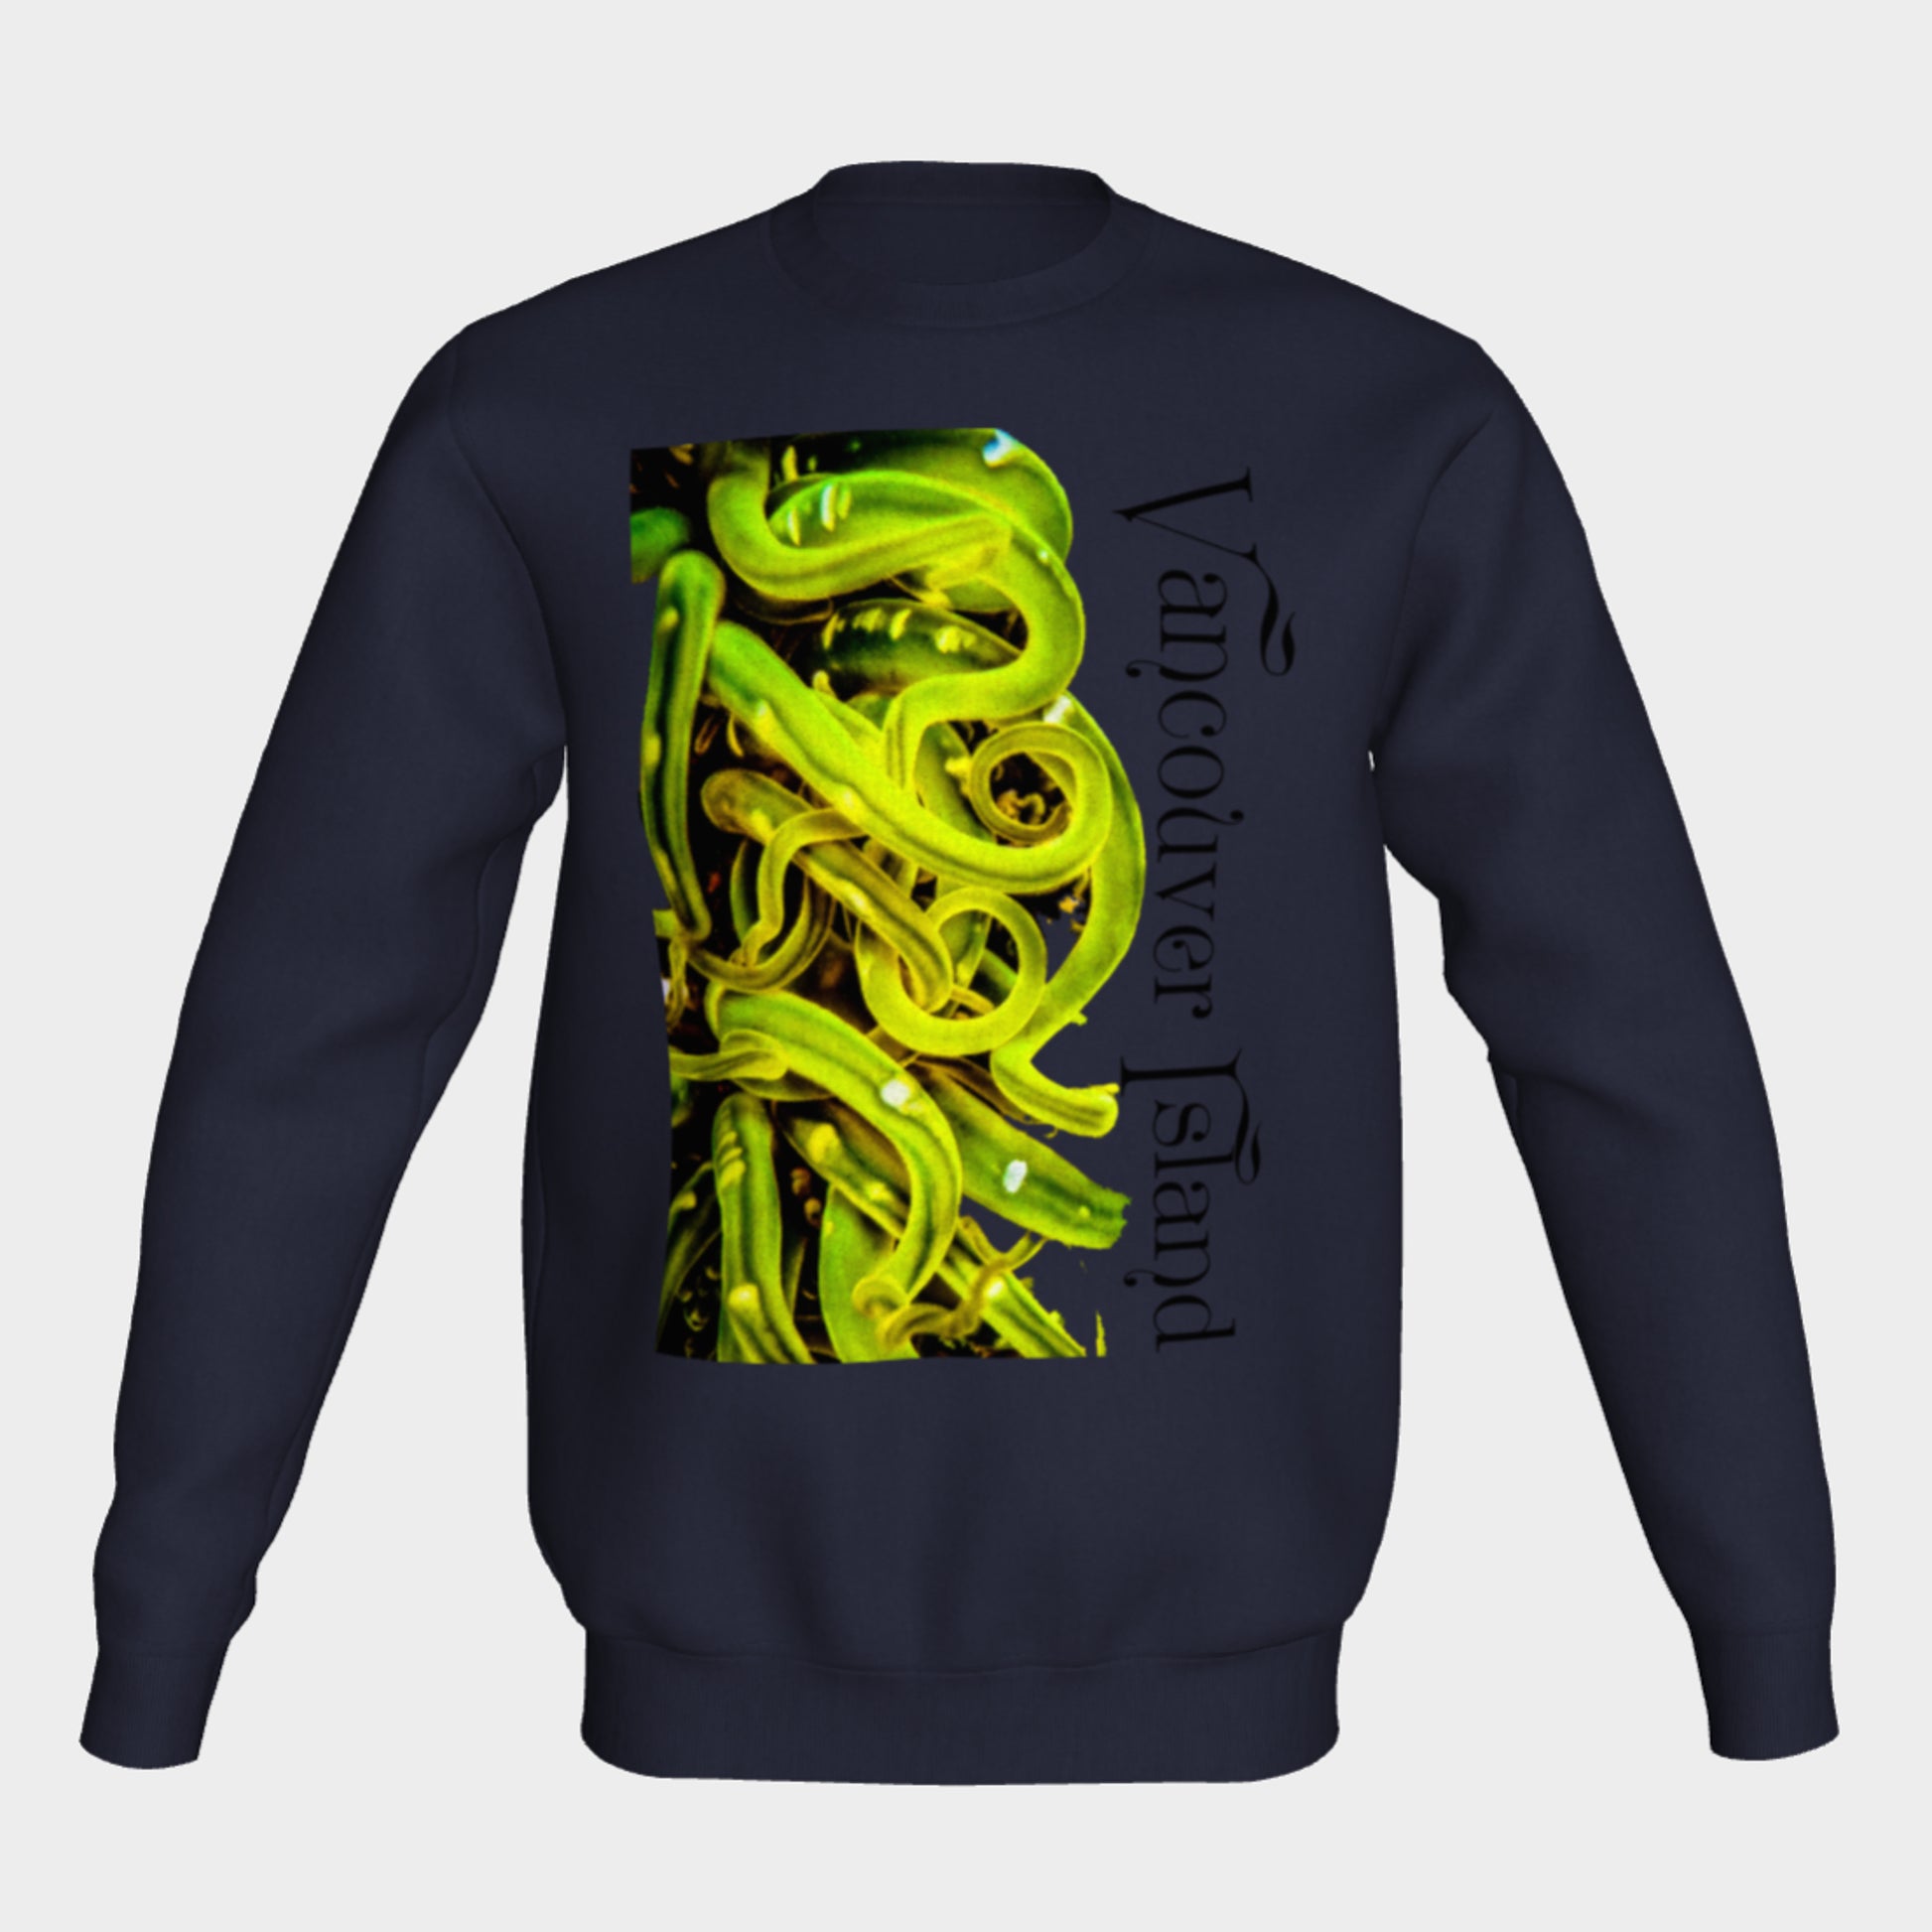 Sea Anemone Vancouver Island Crewneck Sweatshirt What’s better than a super cozy sweatshirt? A super cozy sweatshirt from Van Isle Goddess!  Super cozy unisex sweatshirt for those chilly days.  Excellent for men or women.   Fit is roomy and comfortable. 